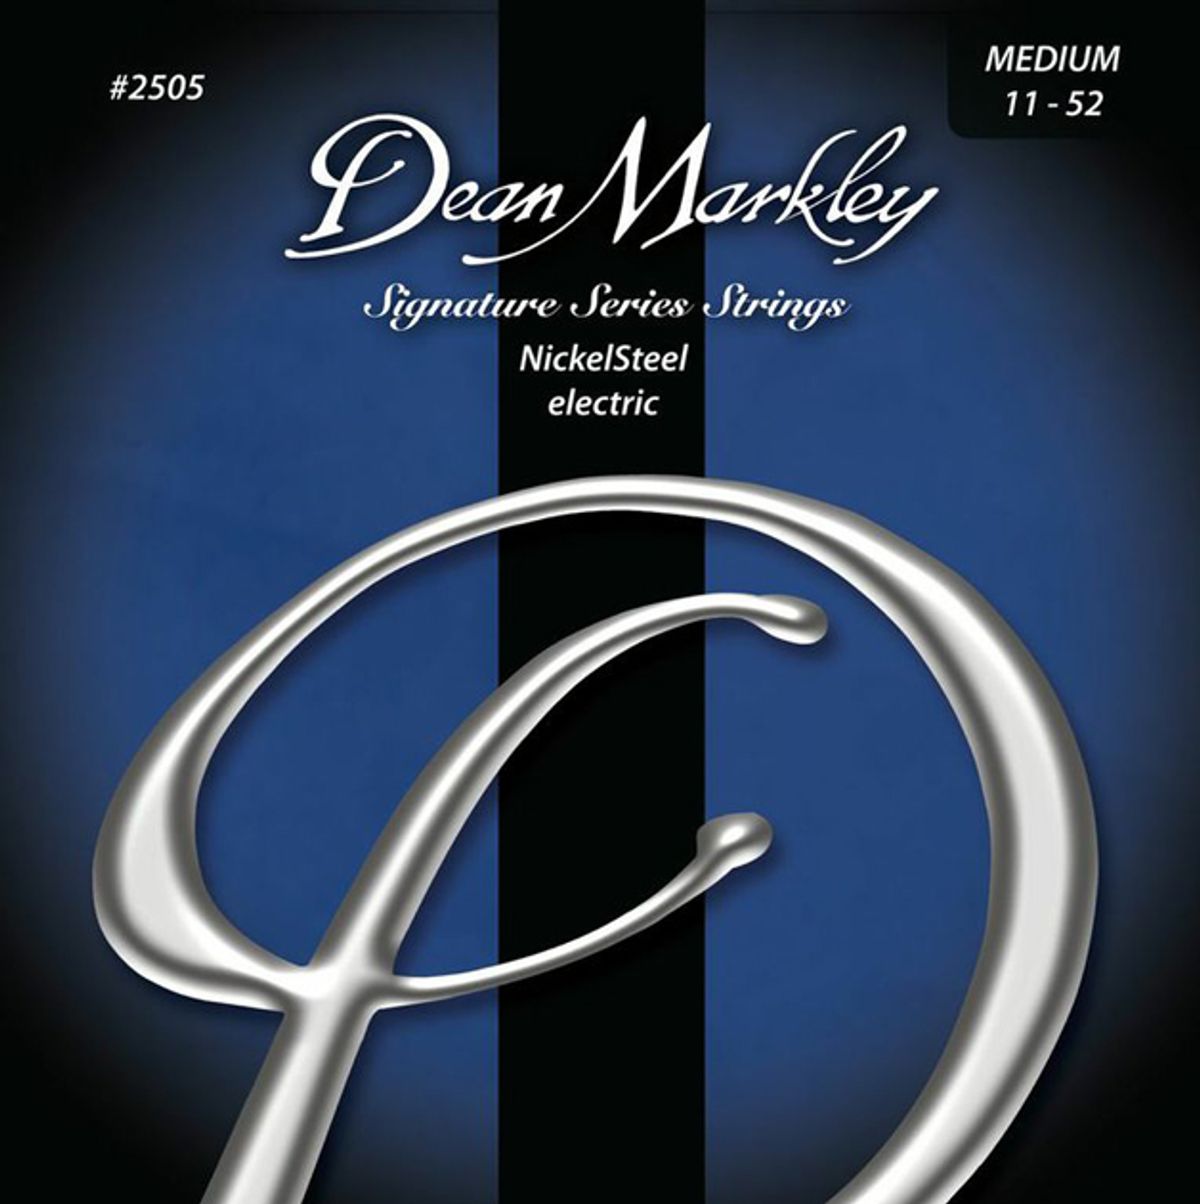 Dean Markley Releases New Signature Series Guitar Strings